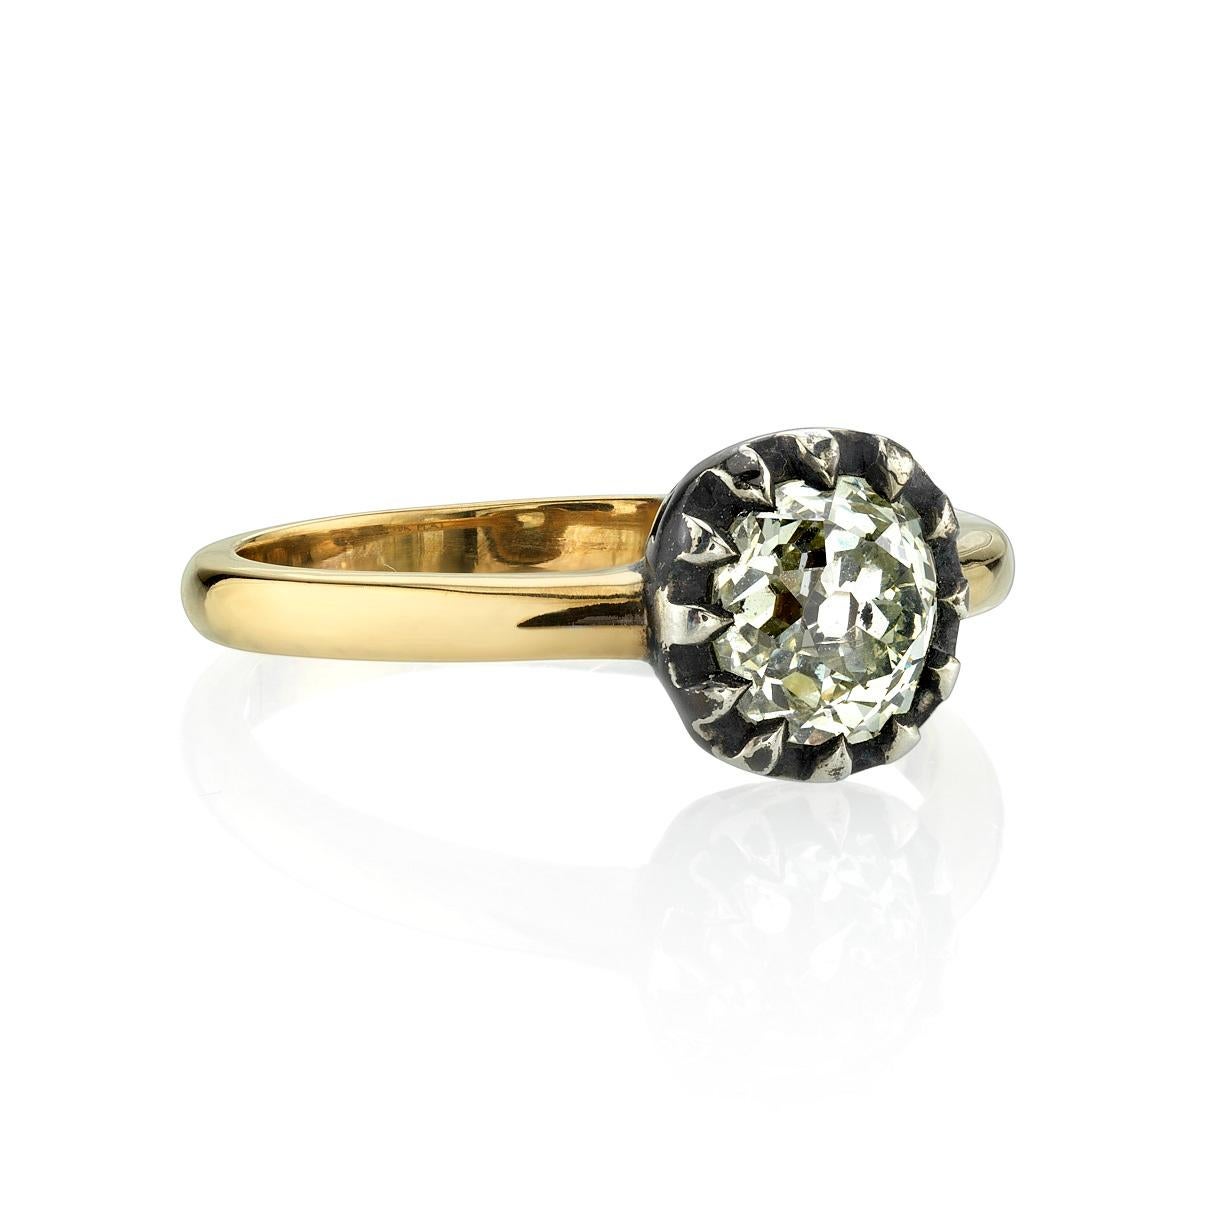 1.13ctw O-P/I1 GIA certified antique old mine cut diamond set in a handcrafted 18k yellow gold and oxidized silver mounting.

